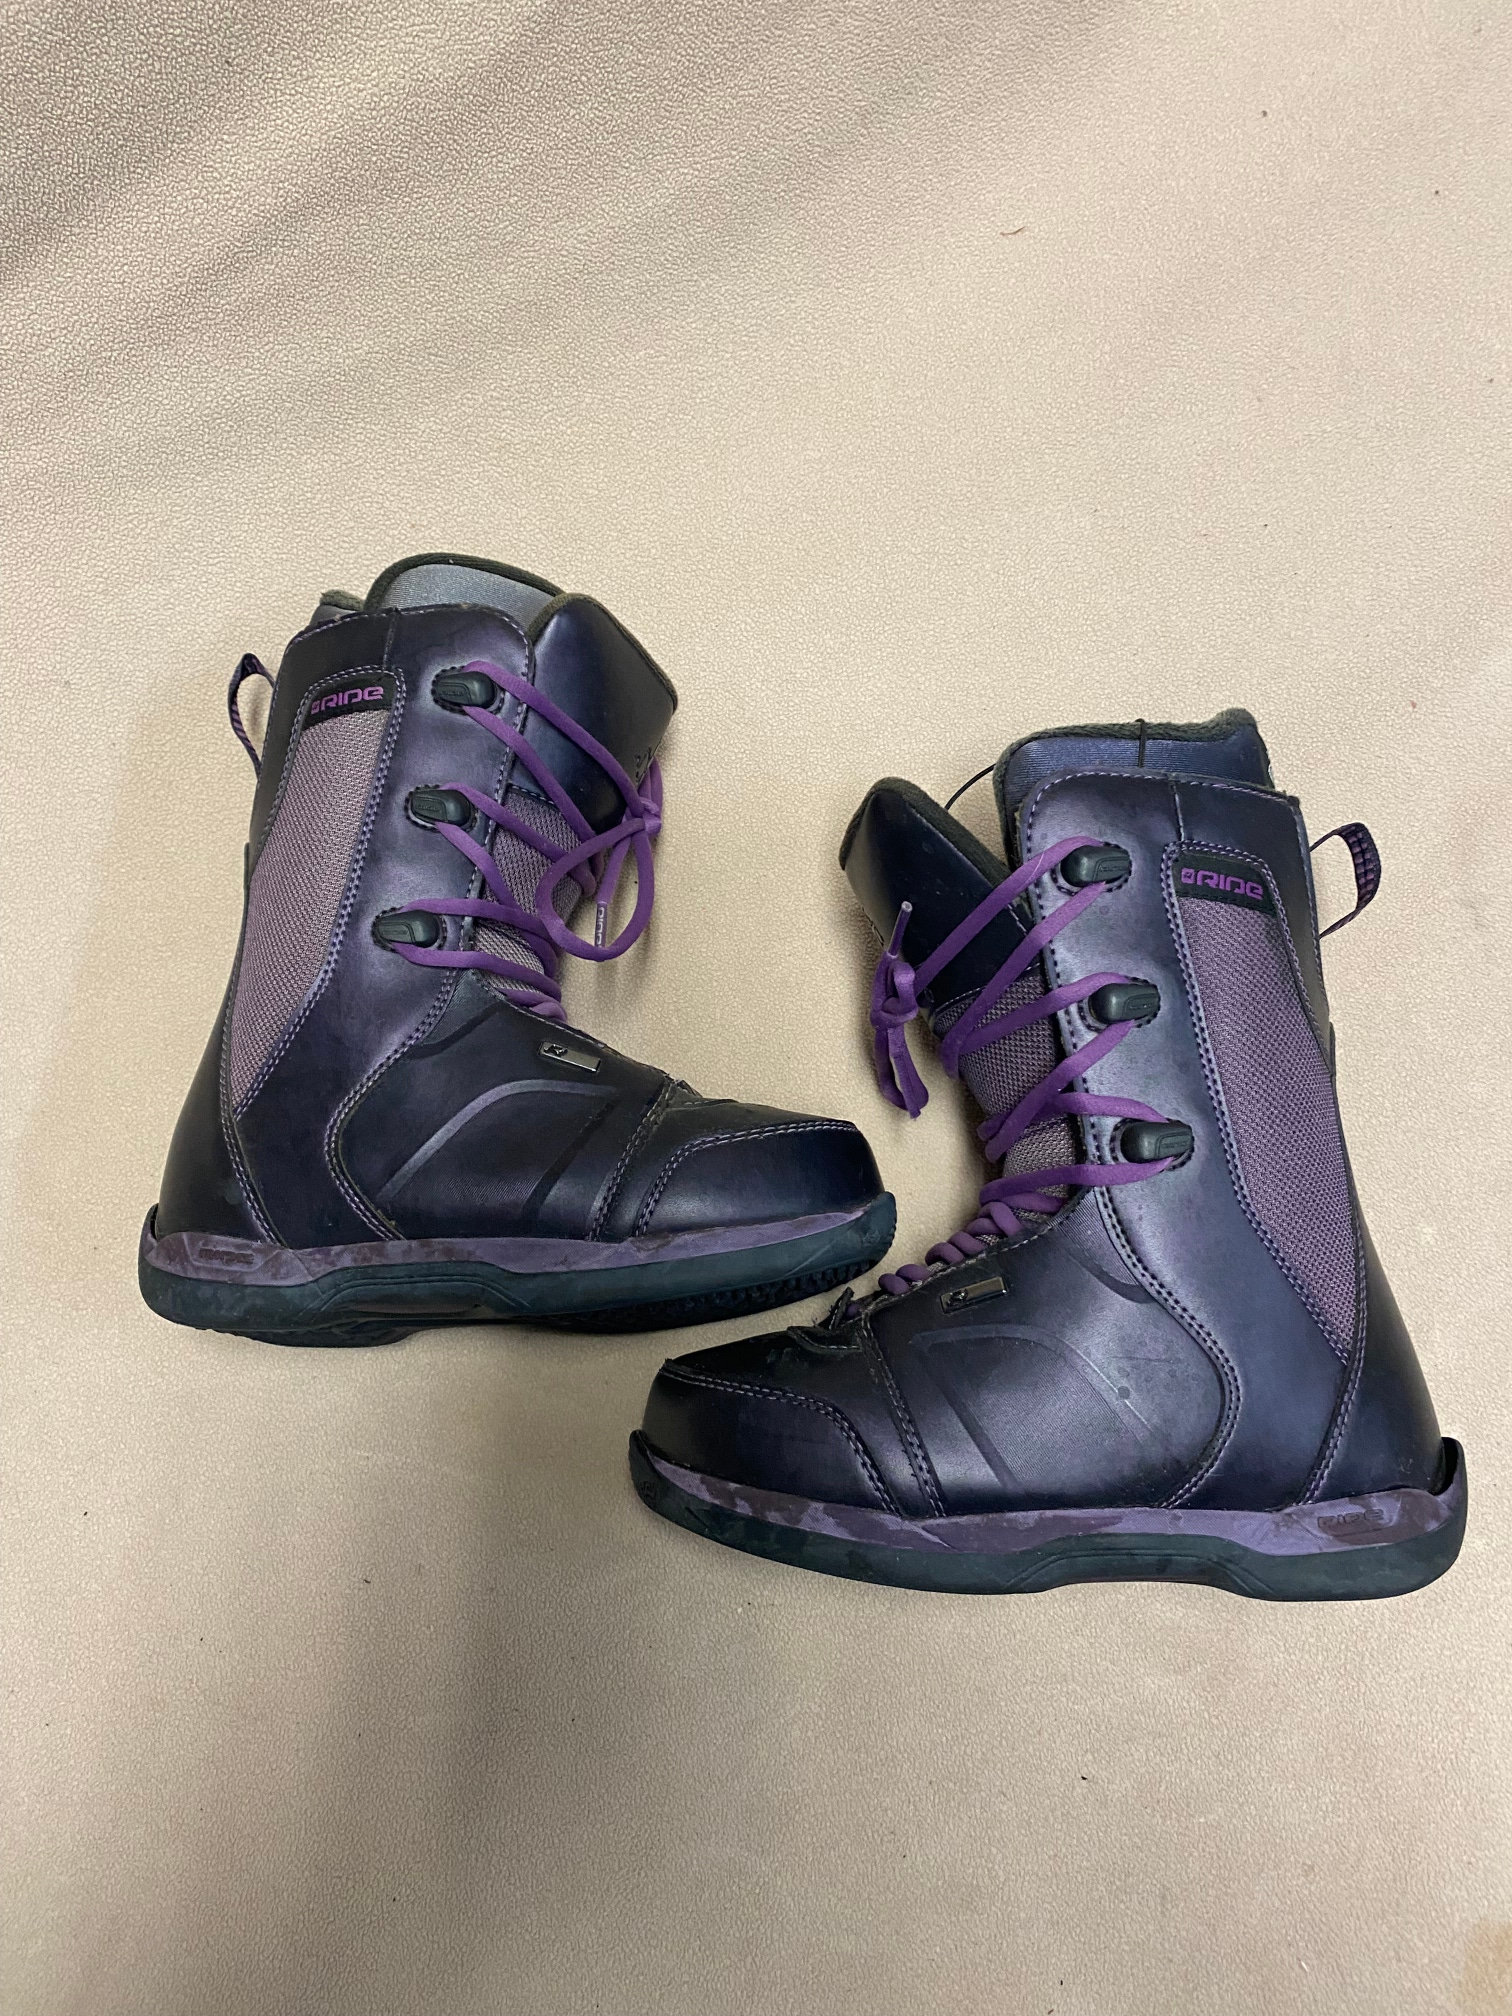 Women's Used Size Women's 6.5 Intuition Donna Snowboard Boots All Mountain